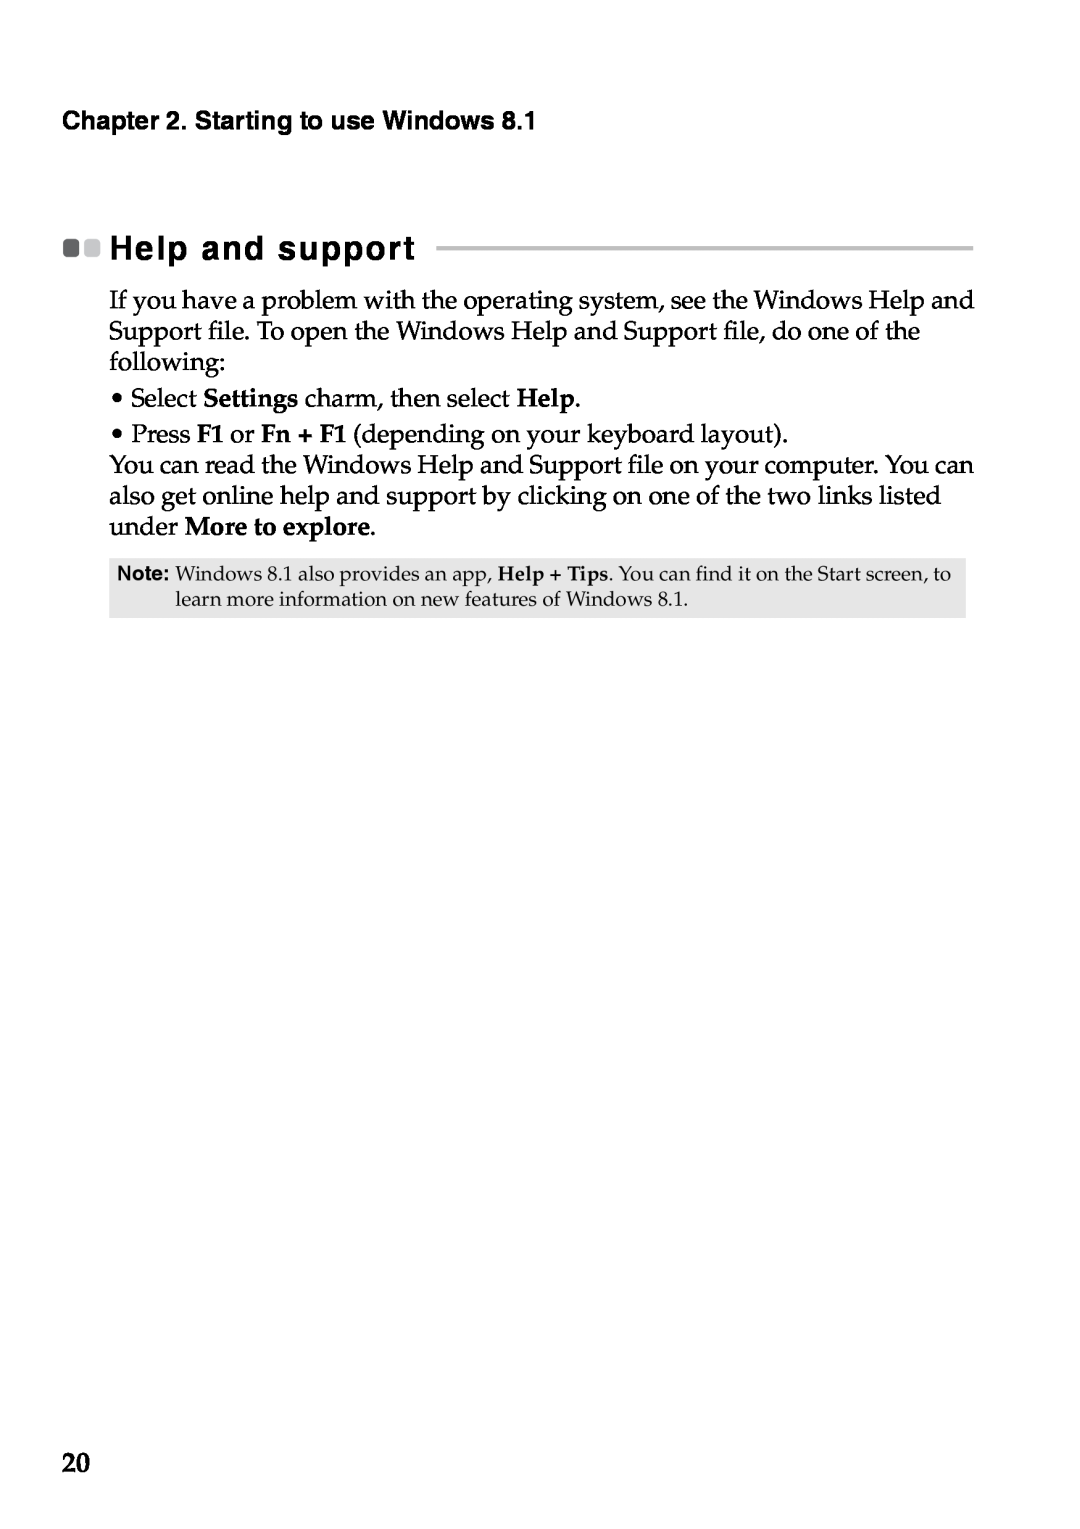 Lenovo 59375192 manual Help and support, Starting to use Windows 